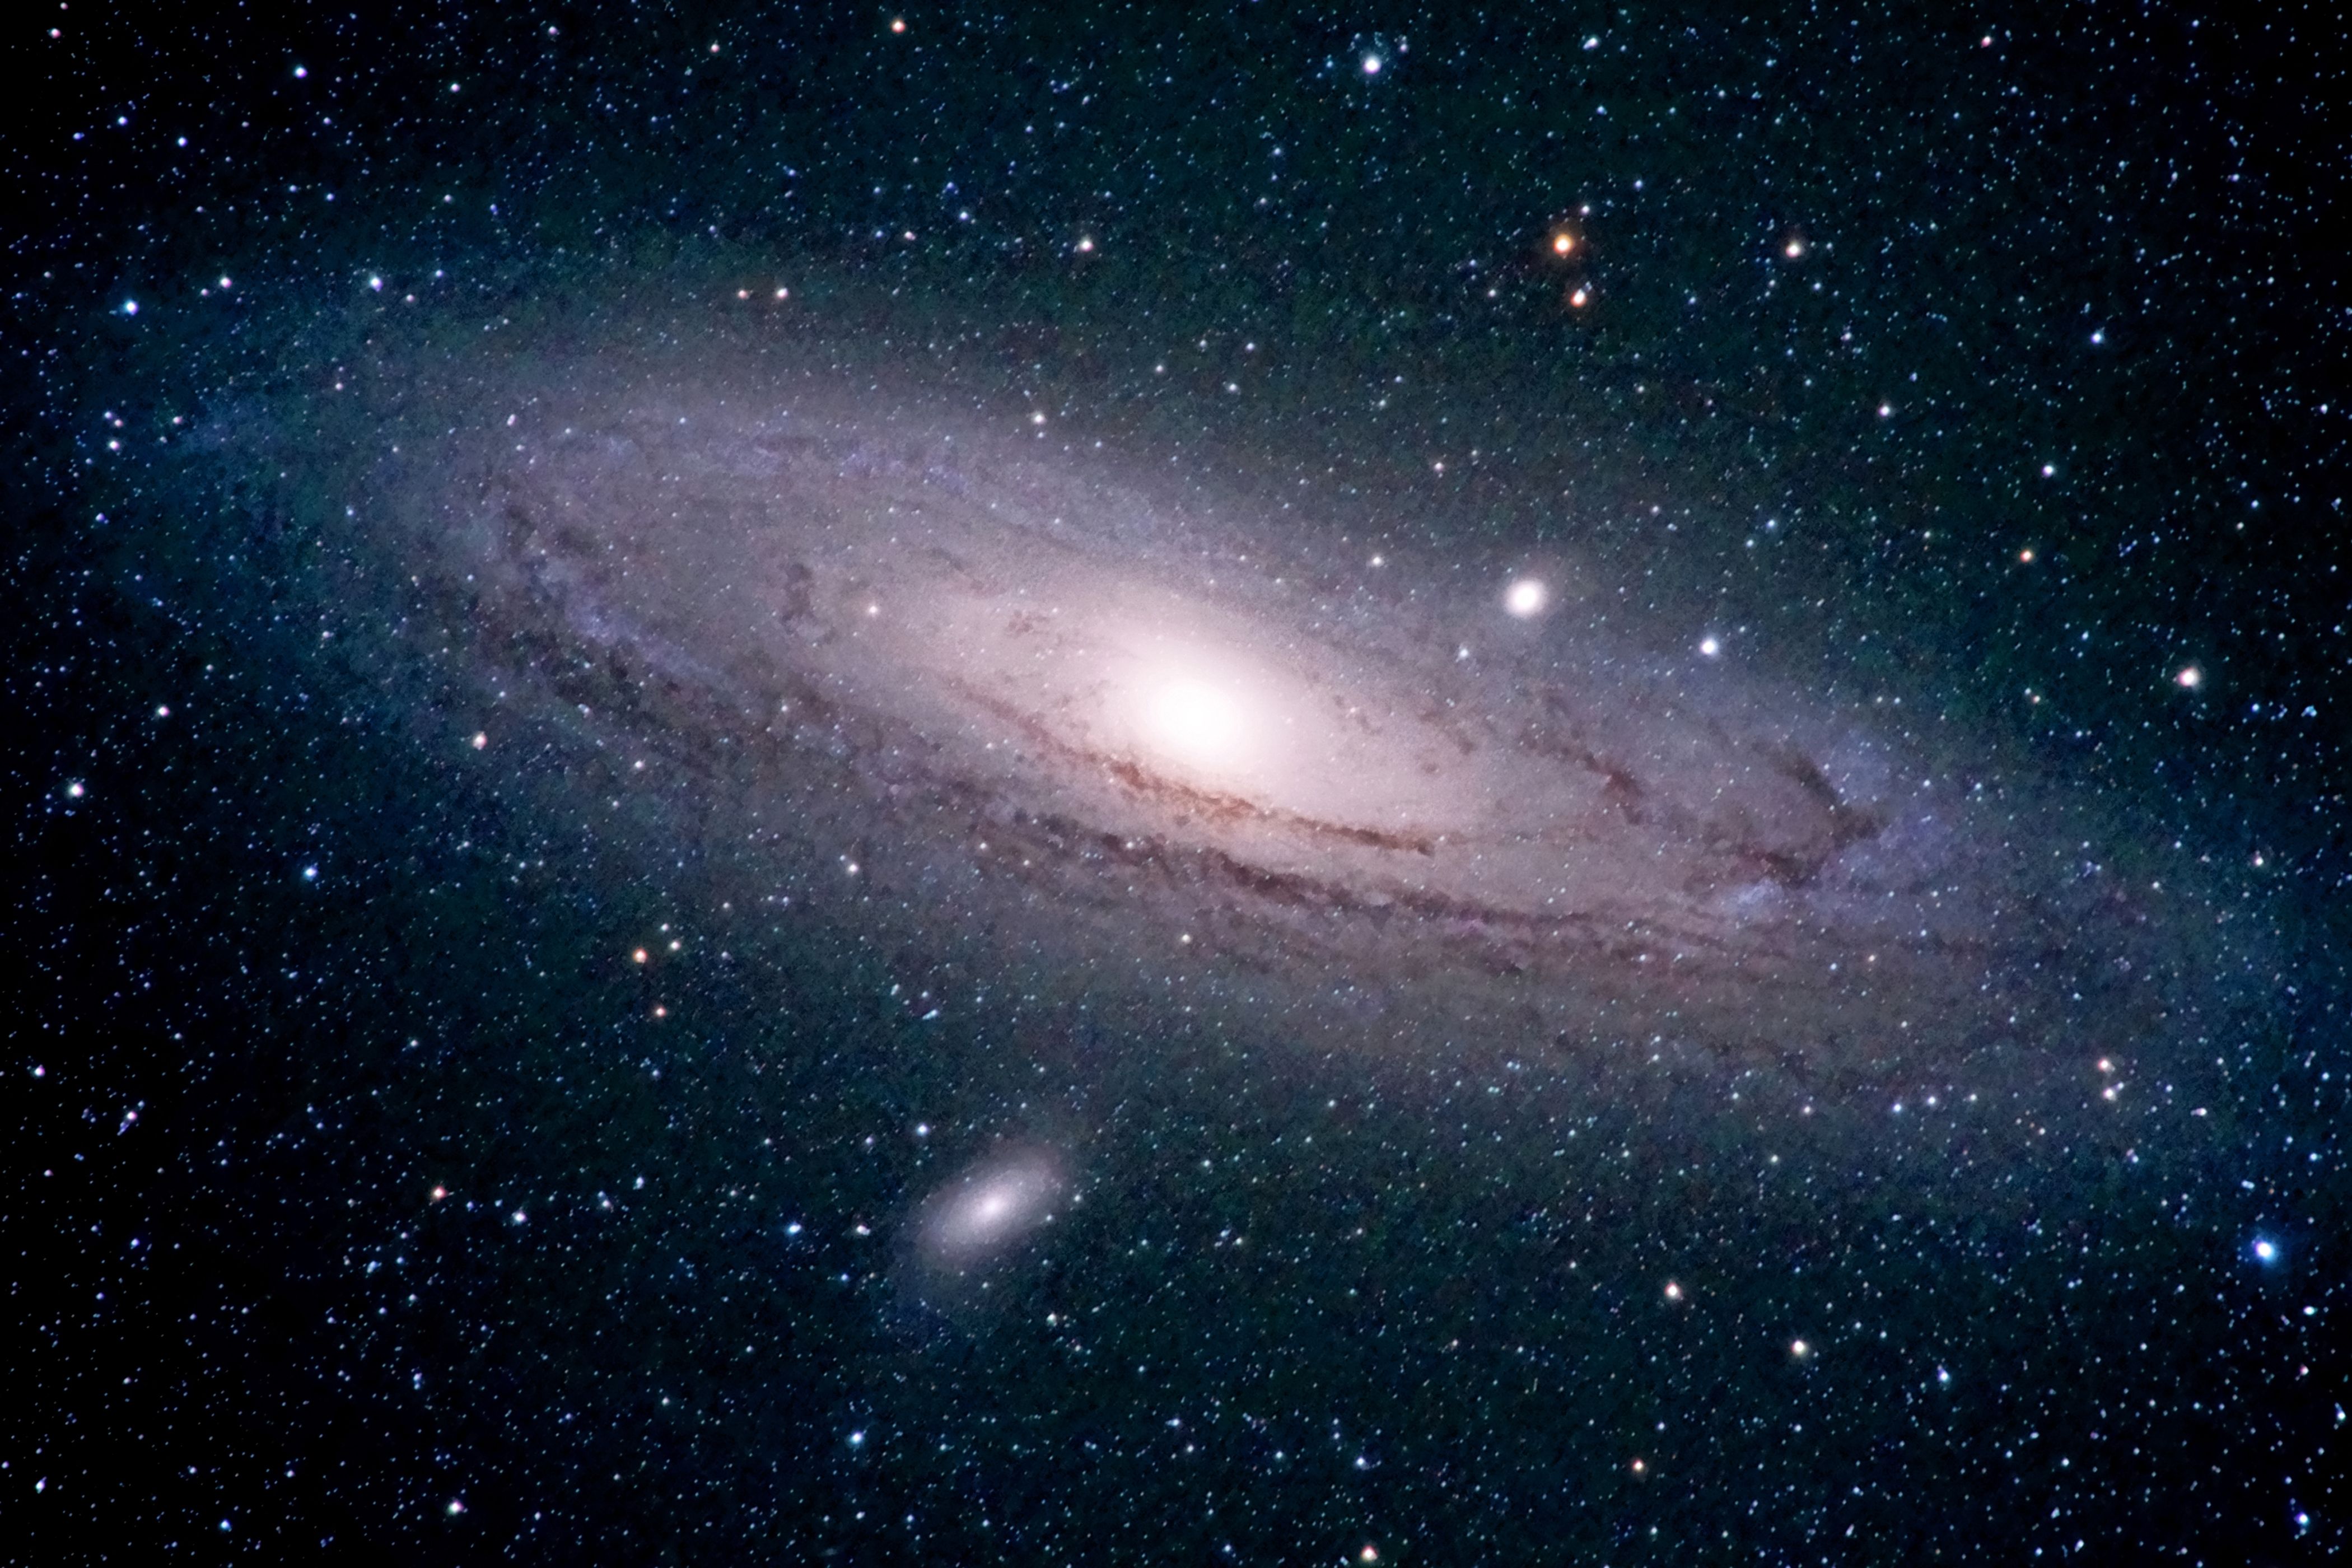 cosmology and astronomy - Class 6 - Quizizz